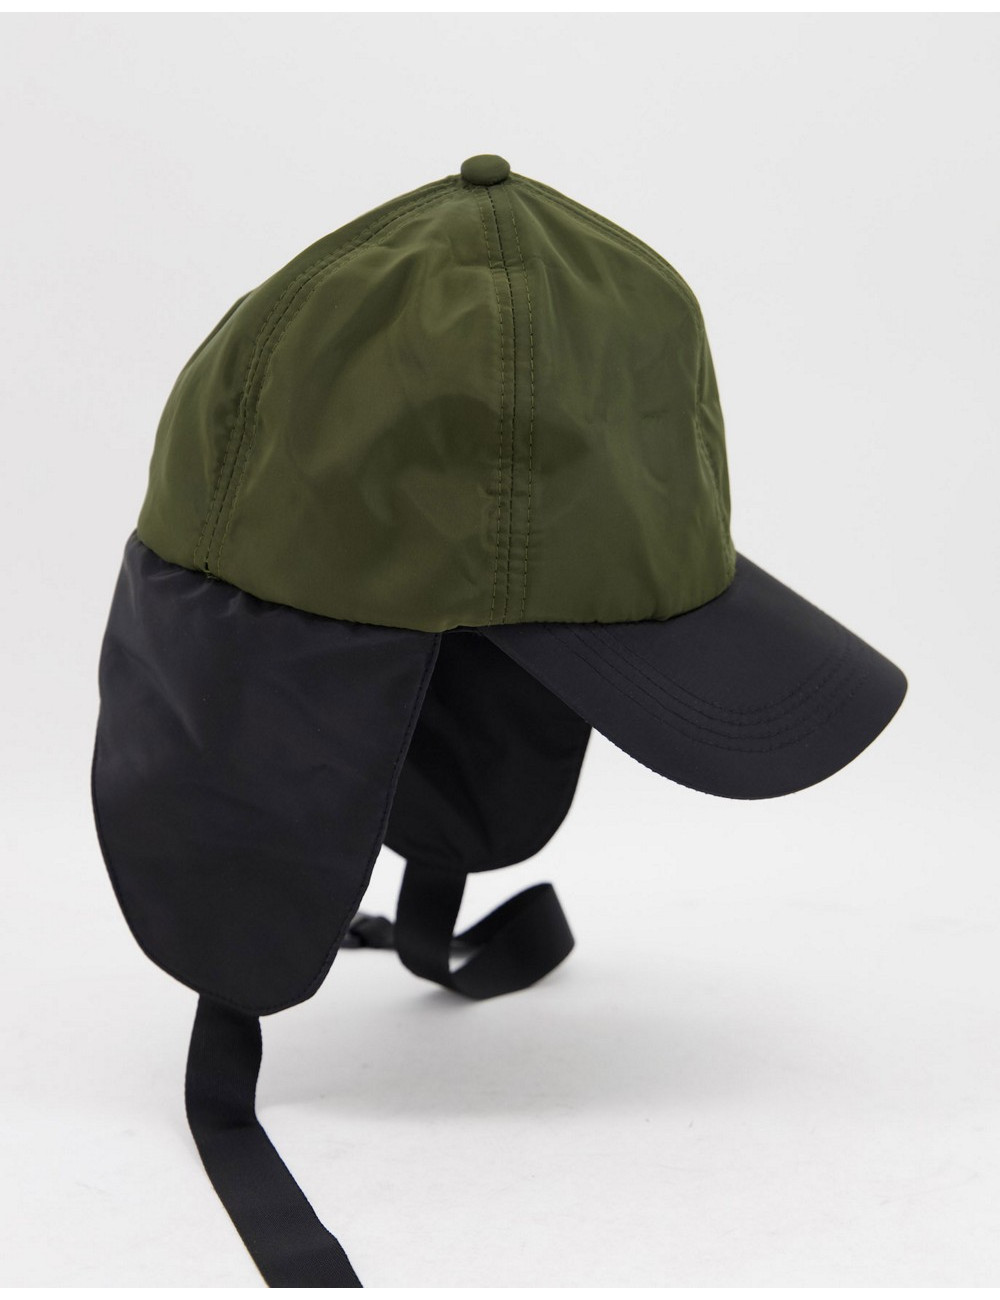 SVNX cap with strap detail